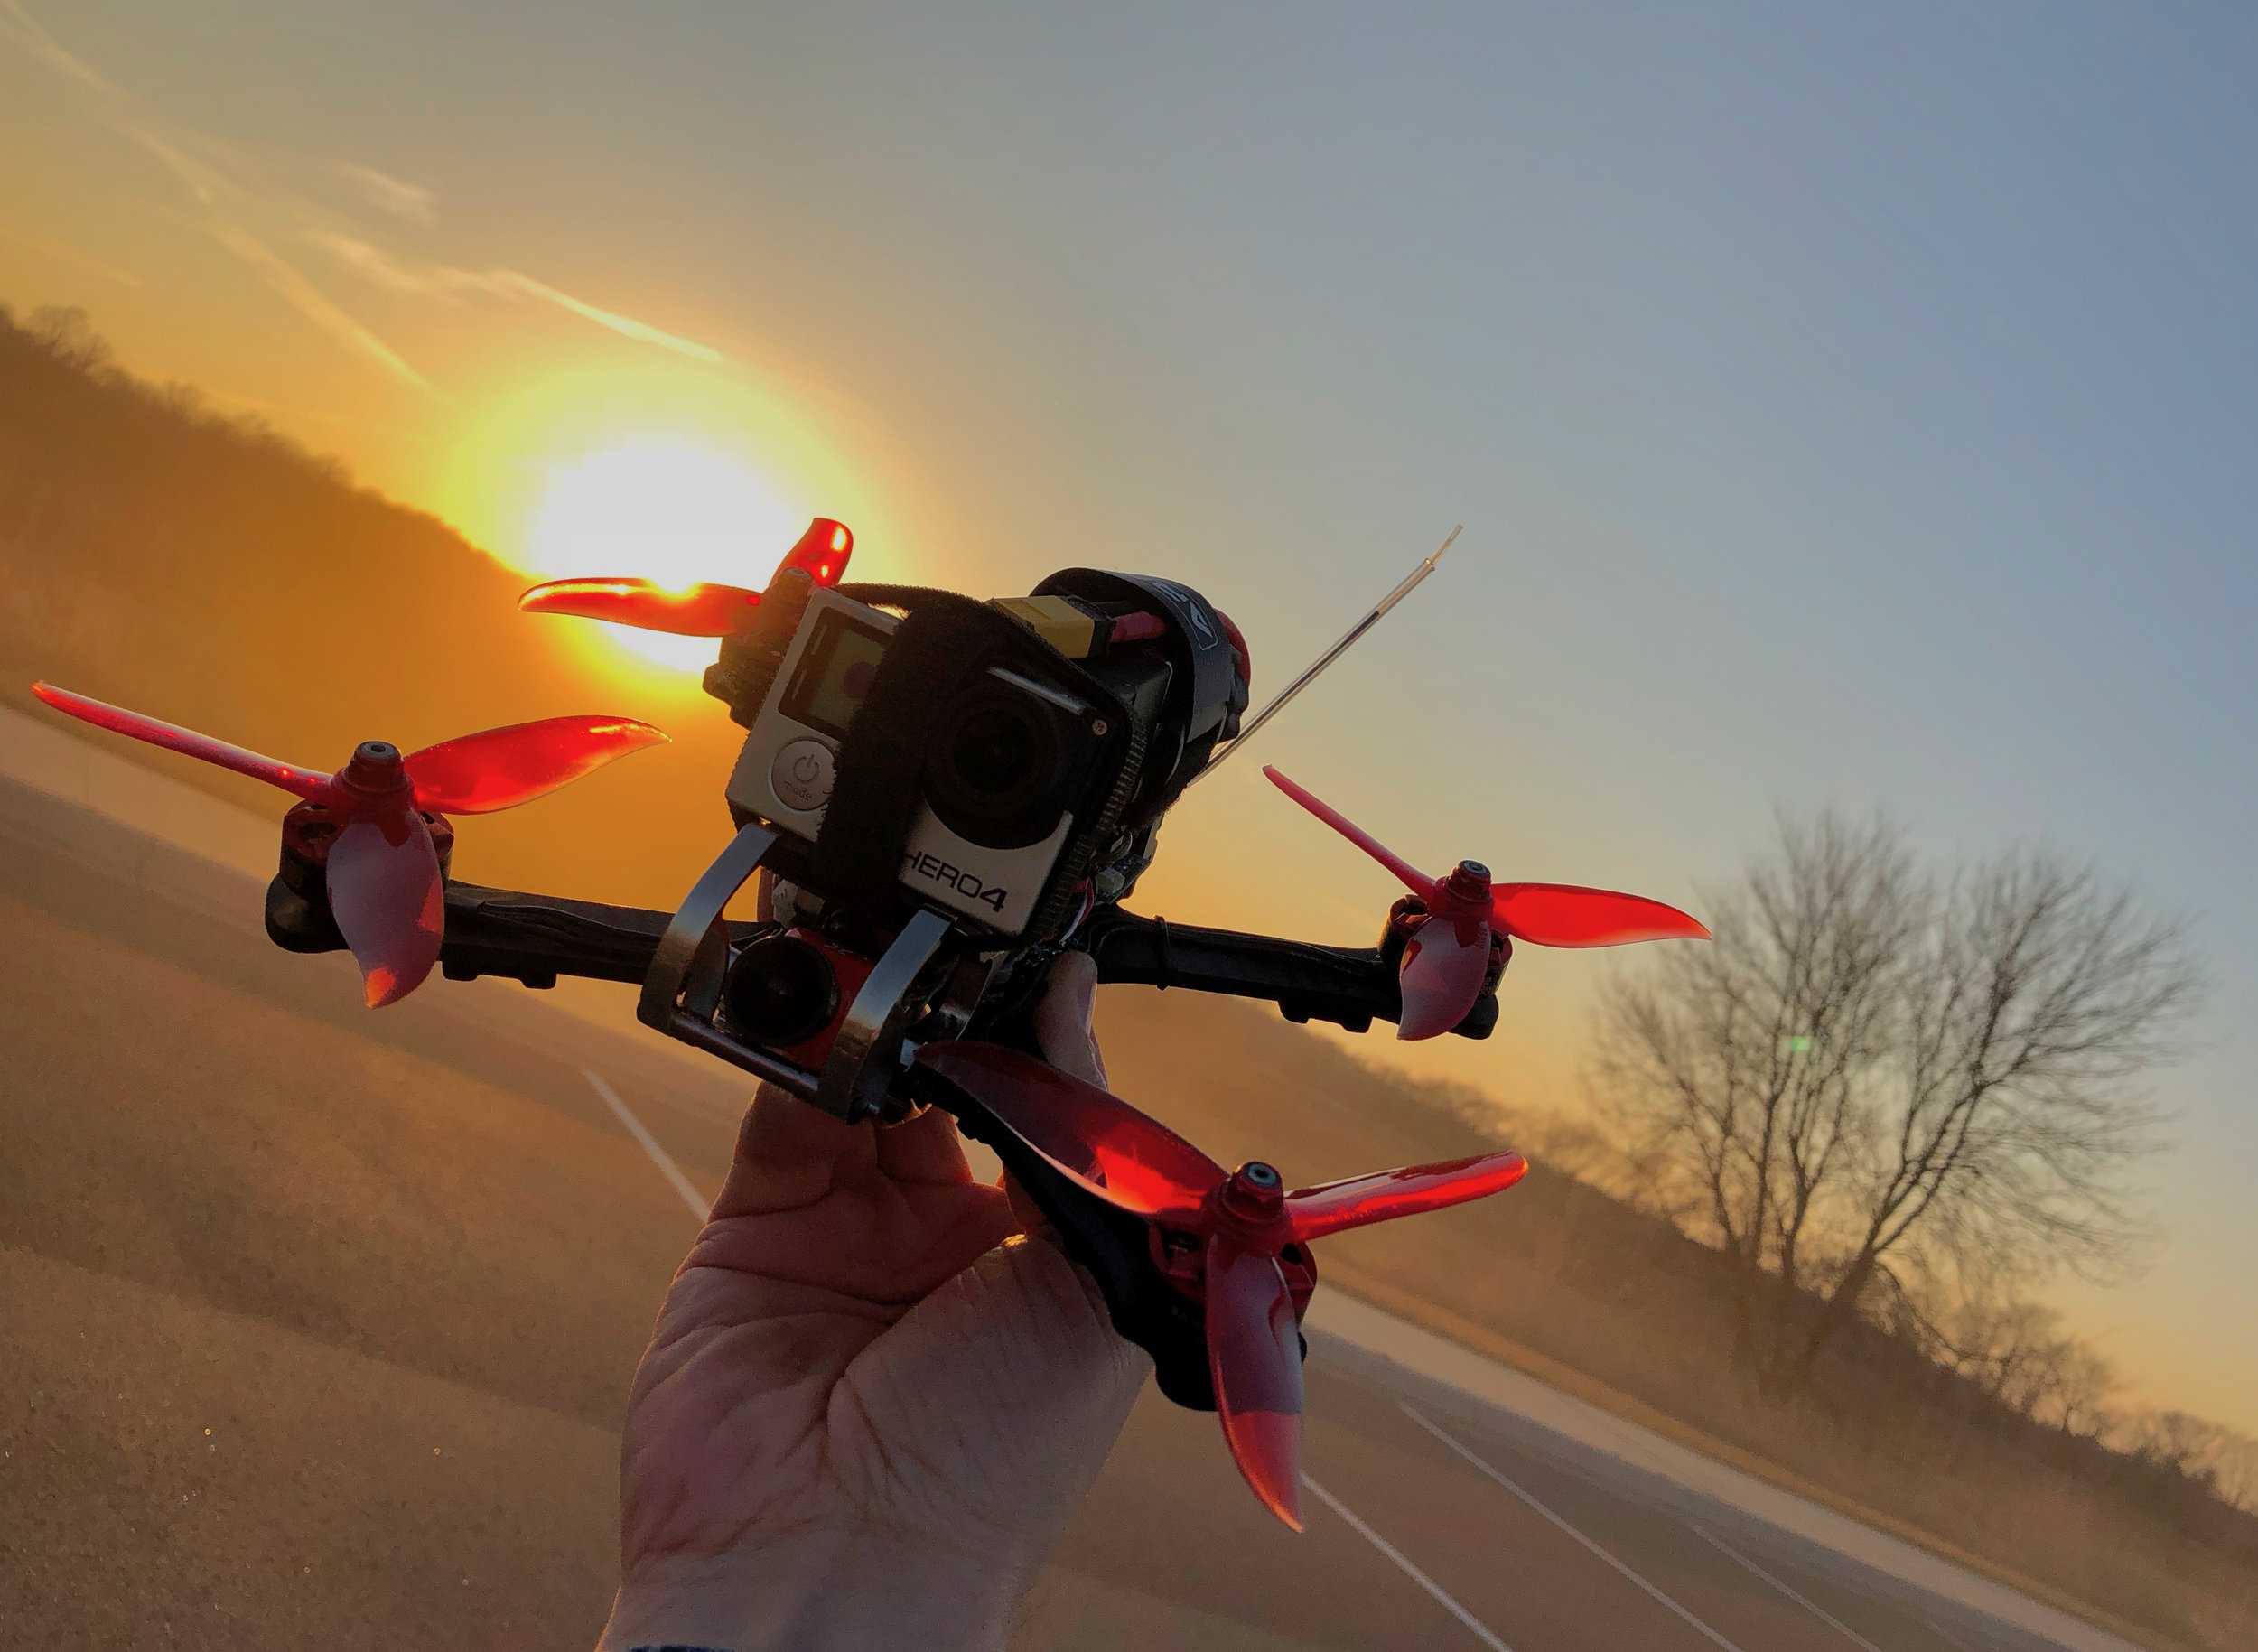   MISSION STATEMENT:   The First Person View ( FPV ) Freedom Coalition fosters the freedoms of recreational FPV pilots, enhances our culture through defined safety guidelines and effective educational resources while protecting the privilege to acces